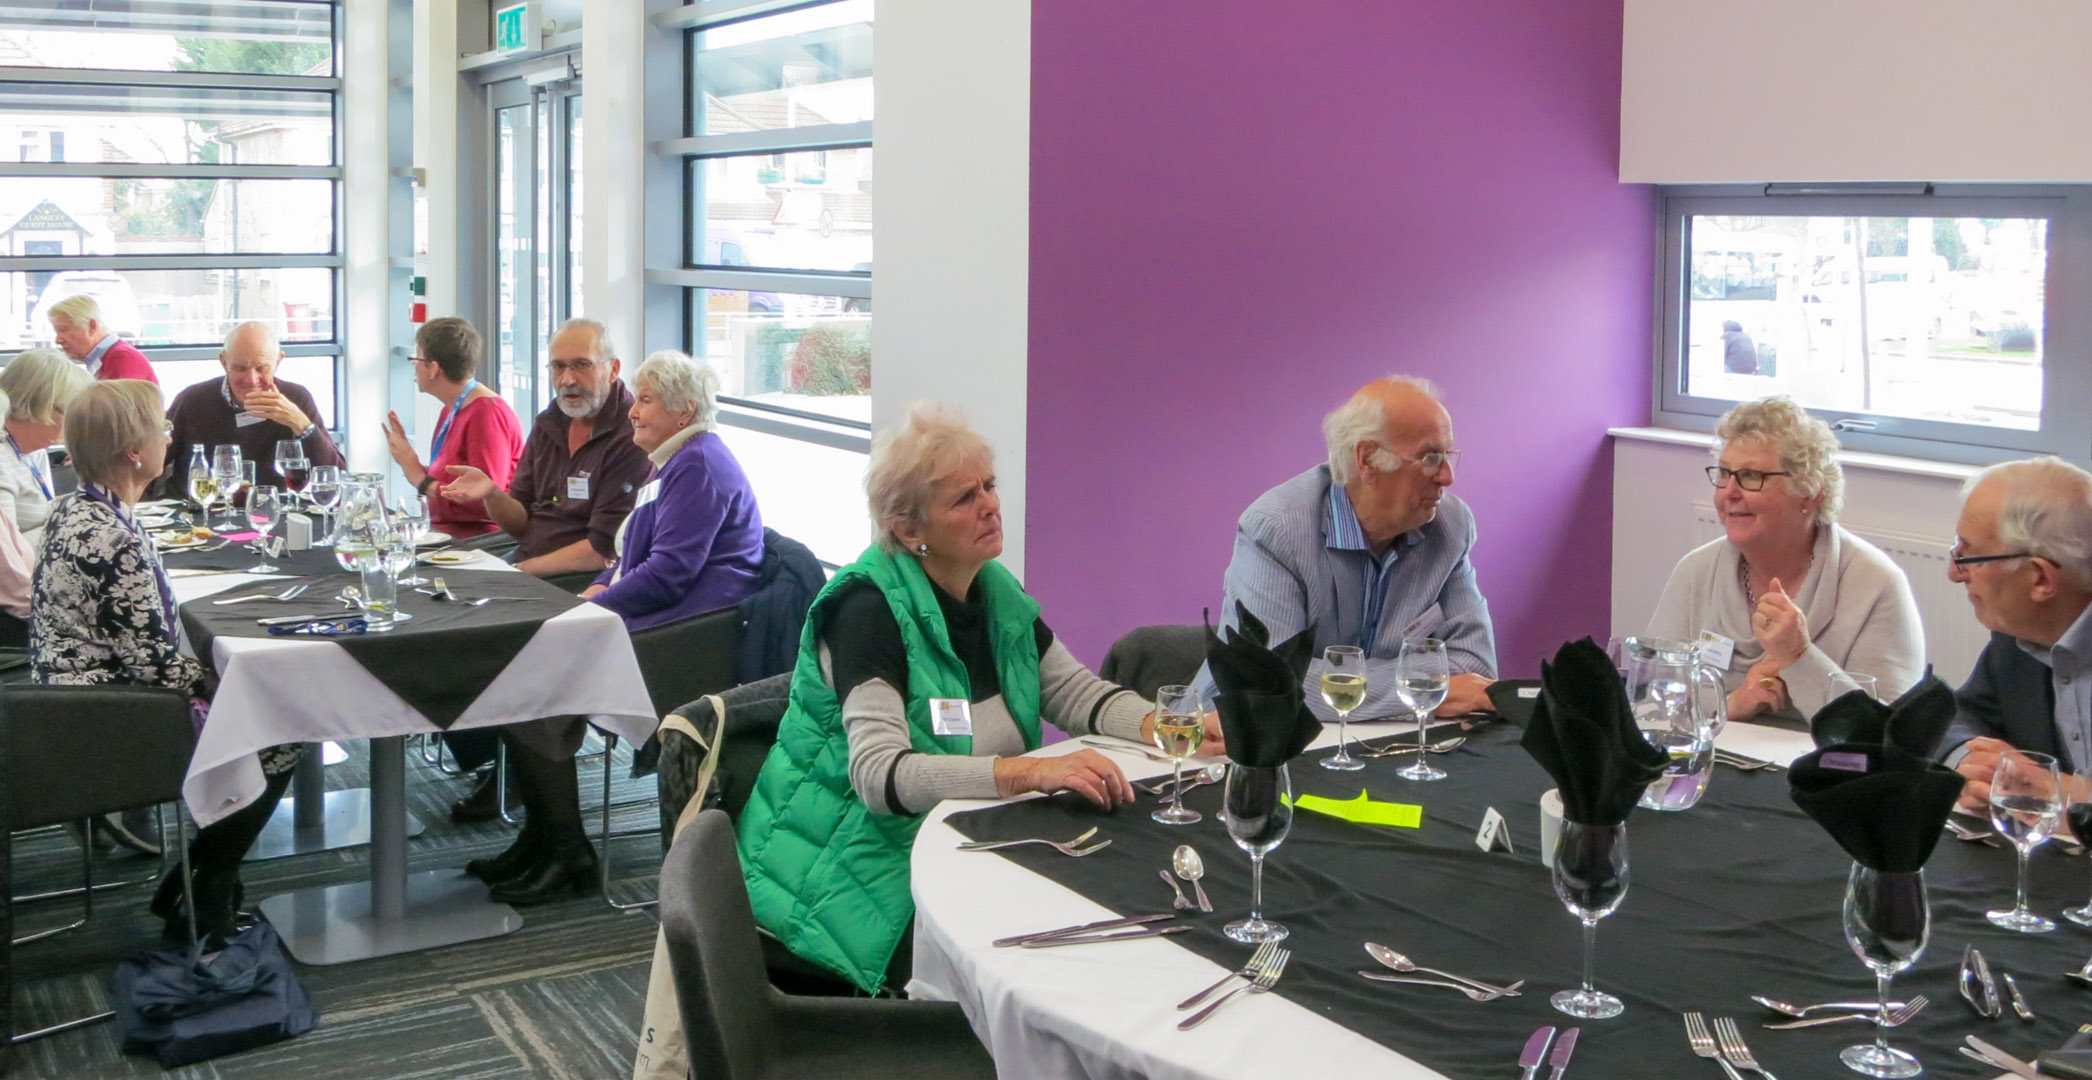 Views of the Convenors Conference 2019